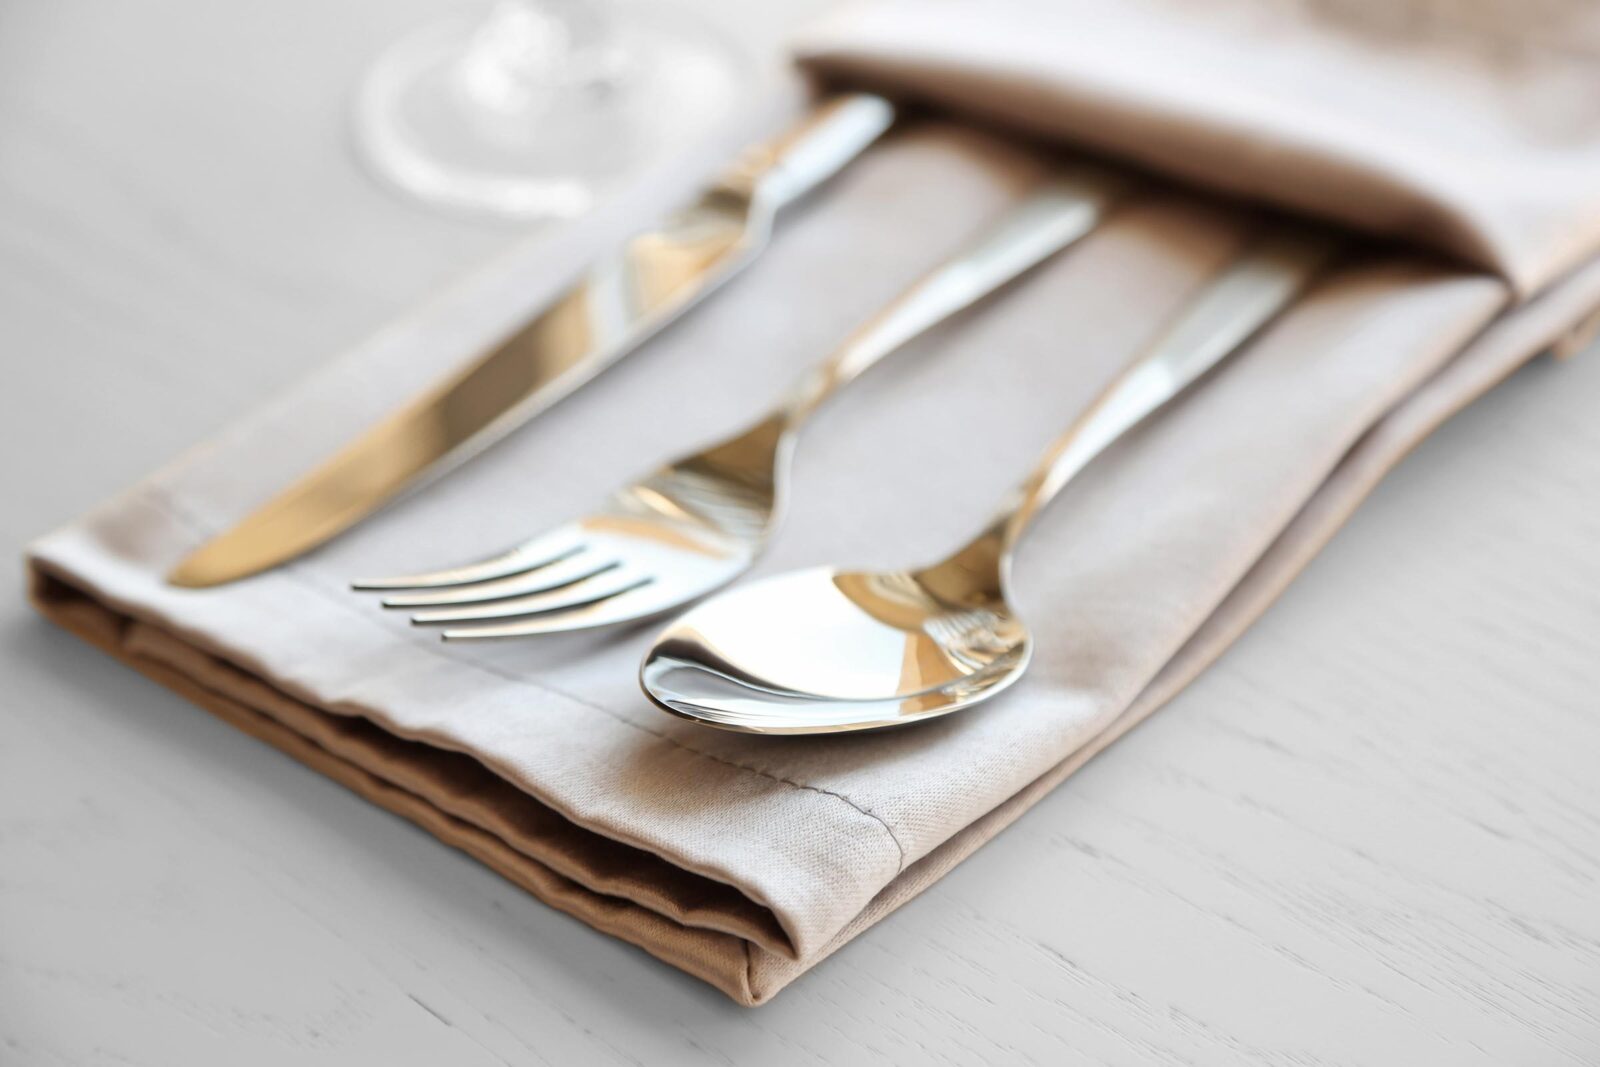 We’ll Reveal Your Personality Type Based on the Way You Think silverware dinner meal utentils fork spoon